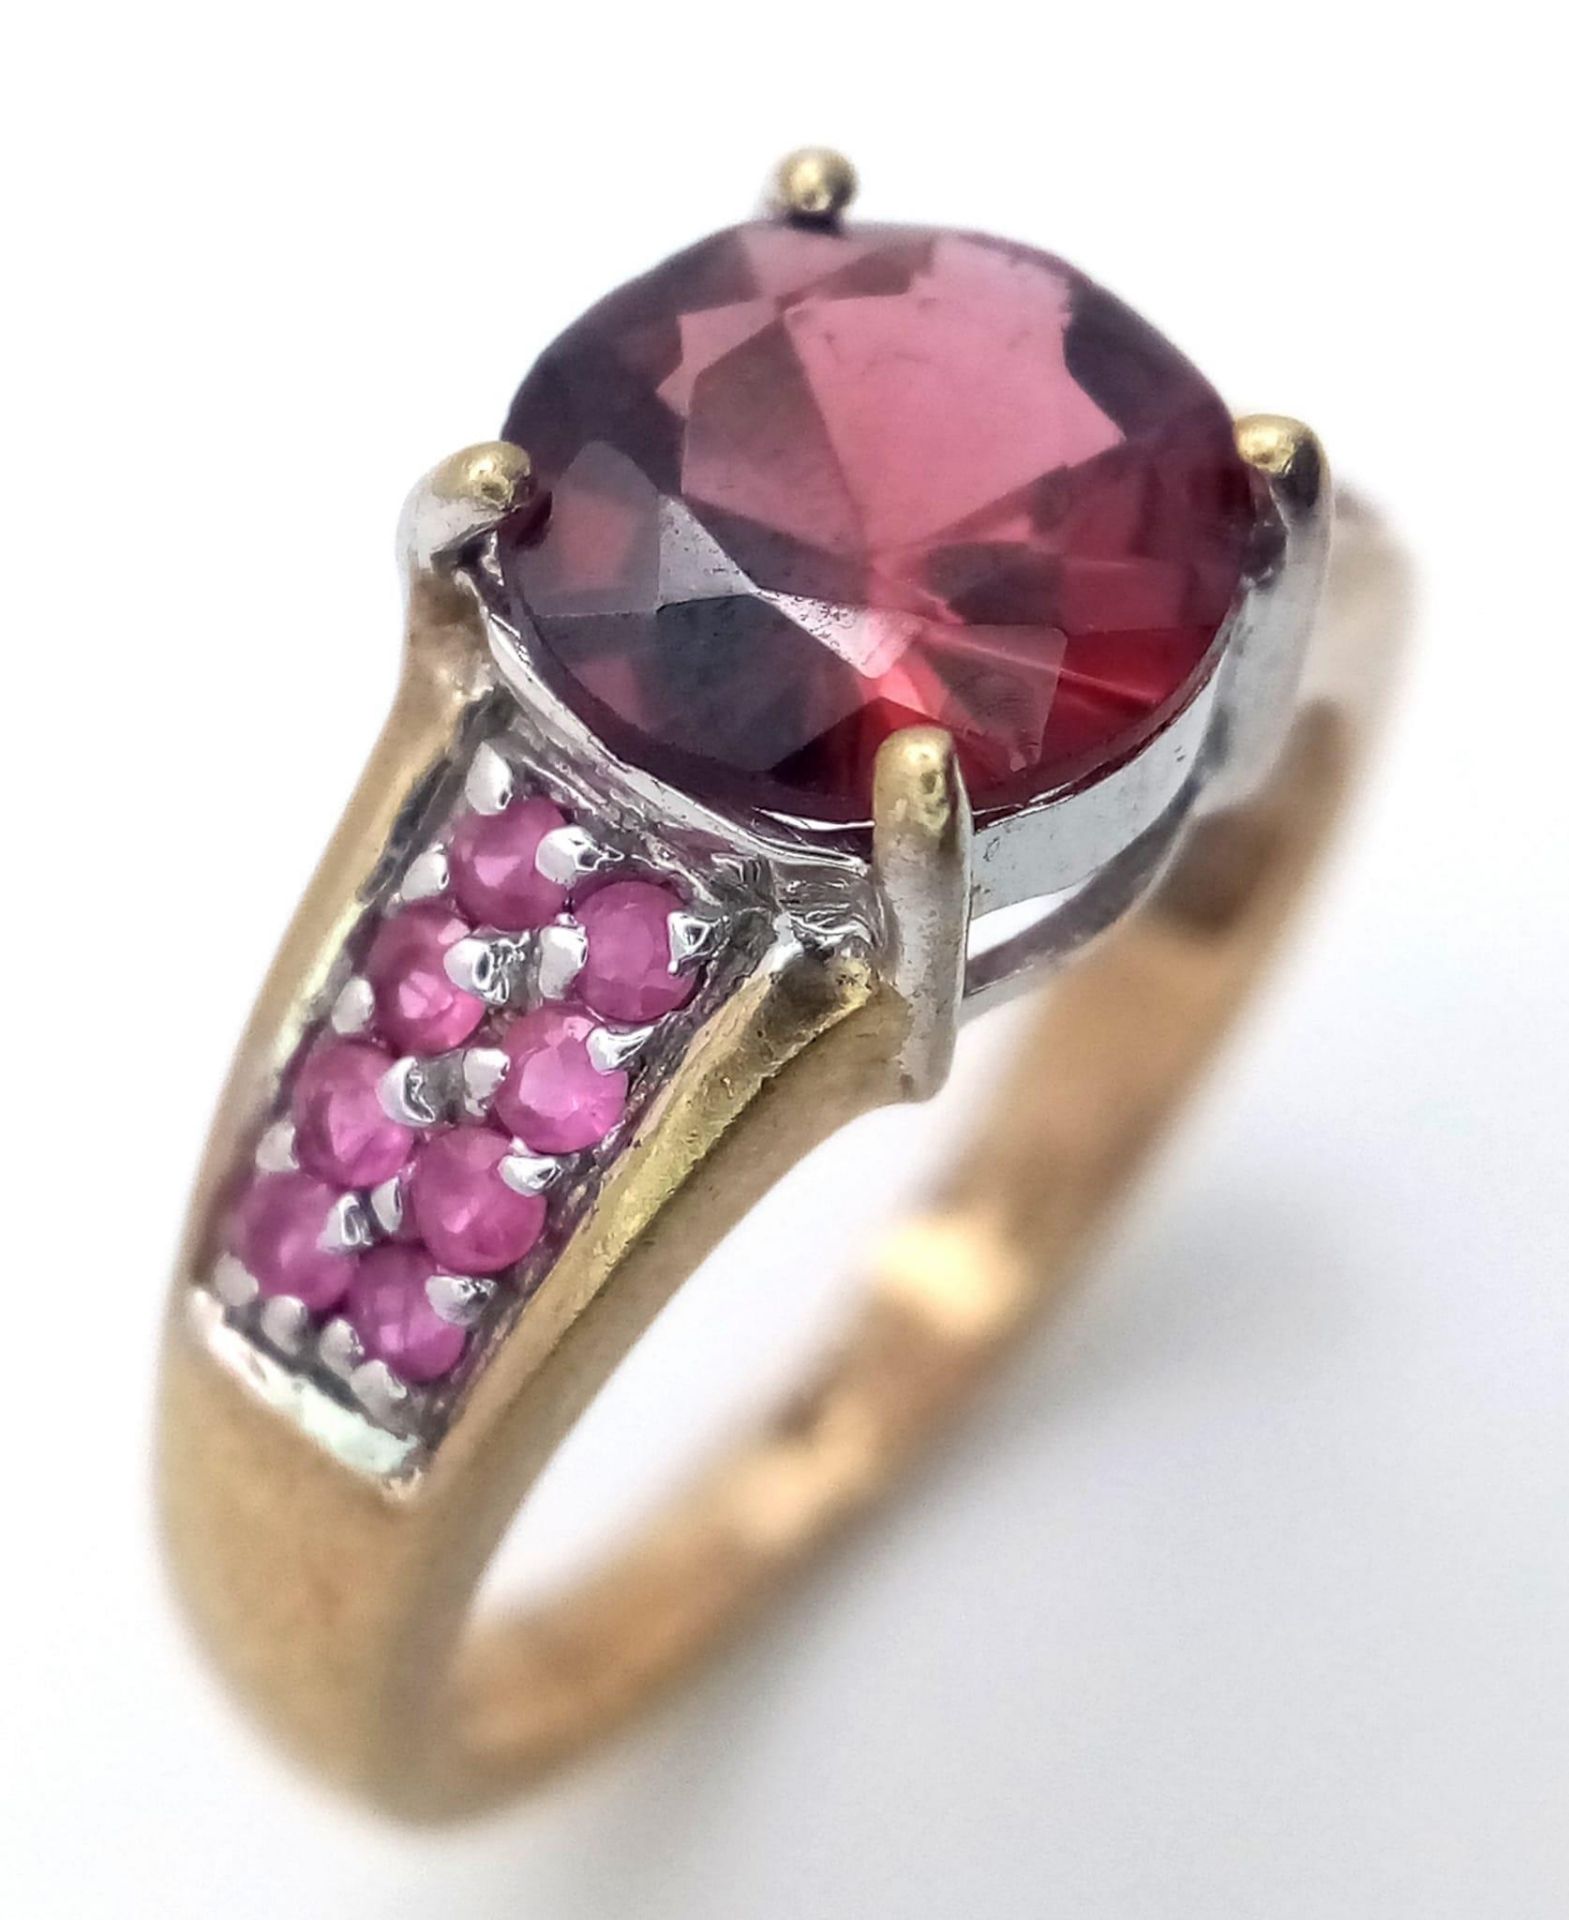 A 9K Yellow Gold Garnet and Ruby Ring. Central garnet with ruby accents. Size K. 3.05g total weight.